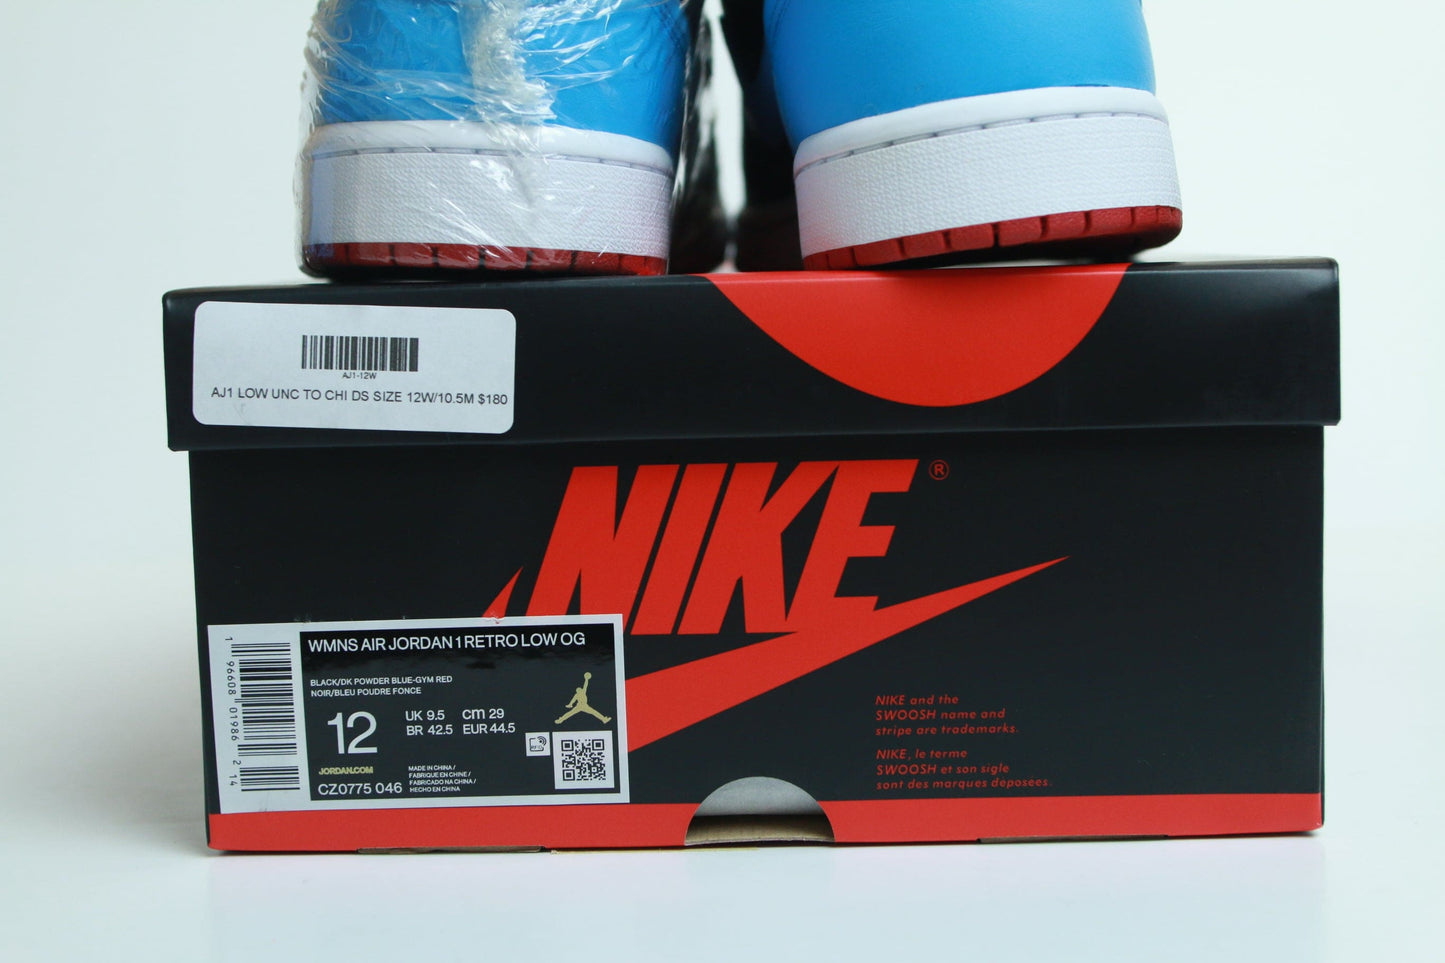 AJ1 LOW UNC TO CHI DS SIZE 12W/10.5M